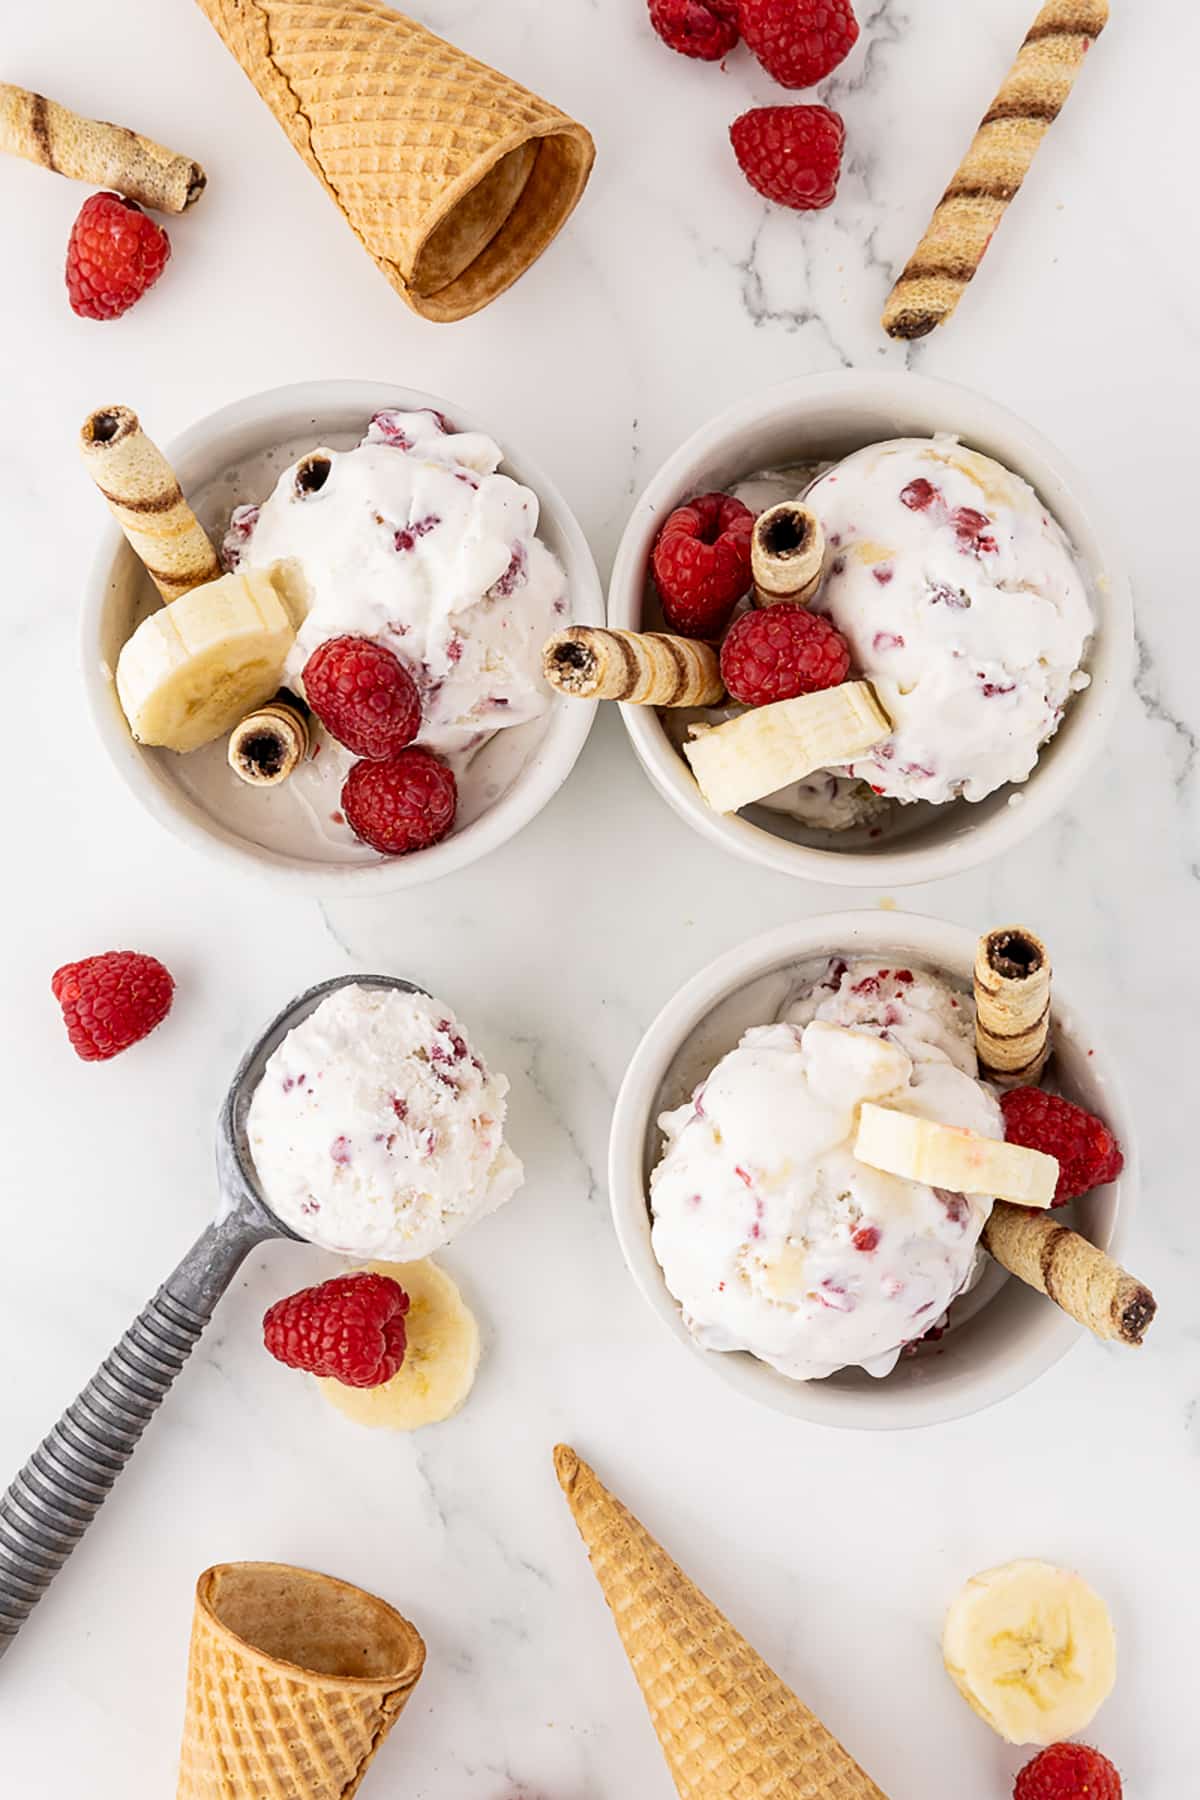 Three bowls of ice cream with raspberries and banana slices and tubular, spiraled cookies surrounded by ice cream cones, fresh bananas and strawberries and an ice cream scoop with a scoop of ice cream